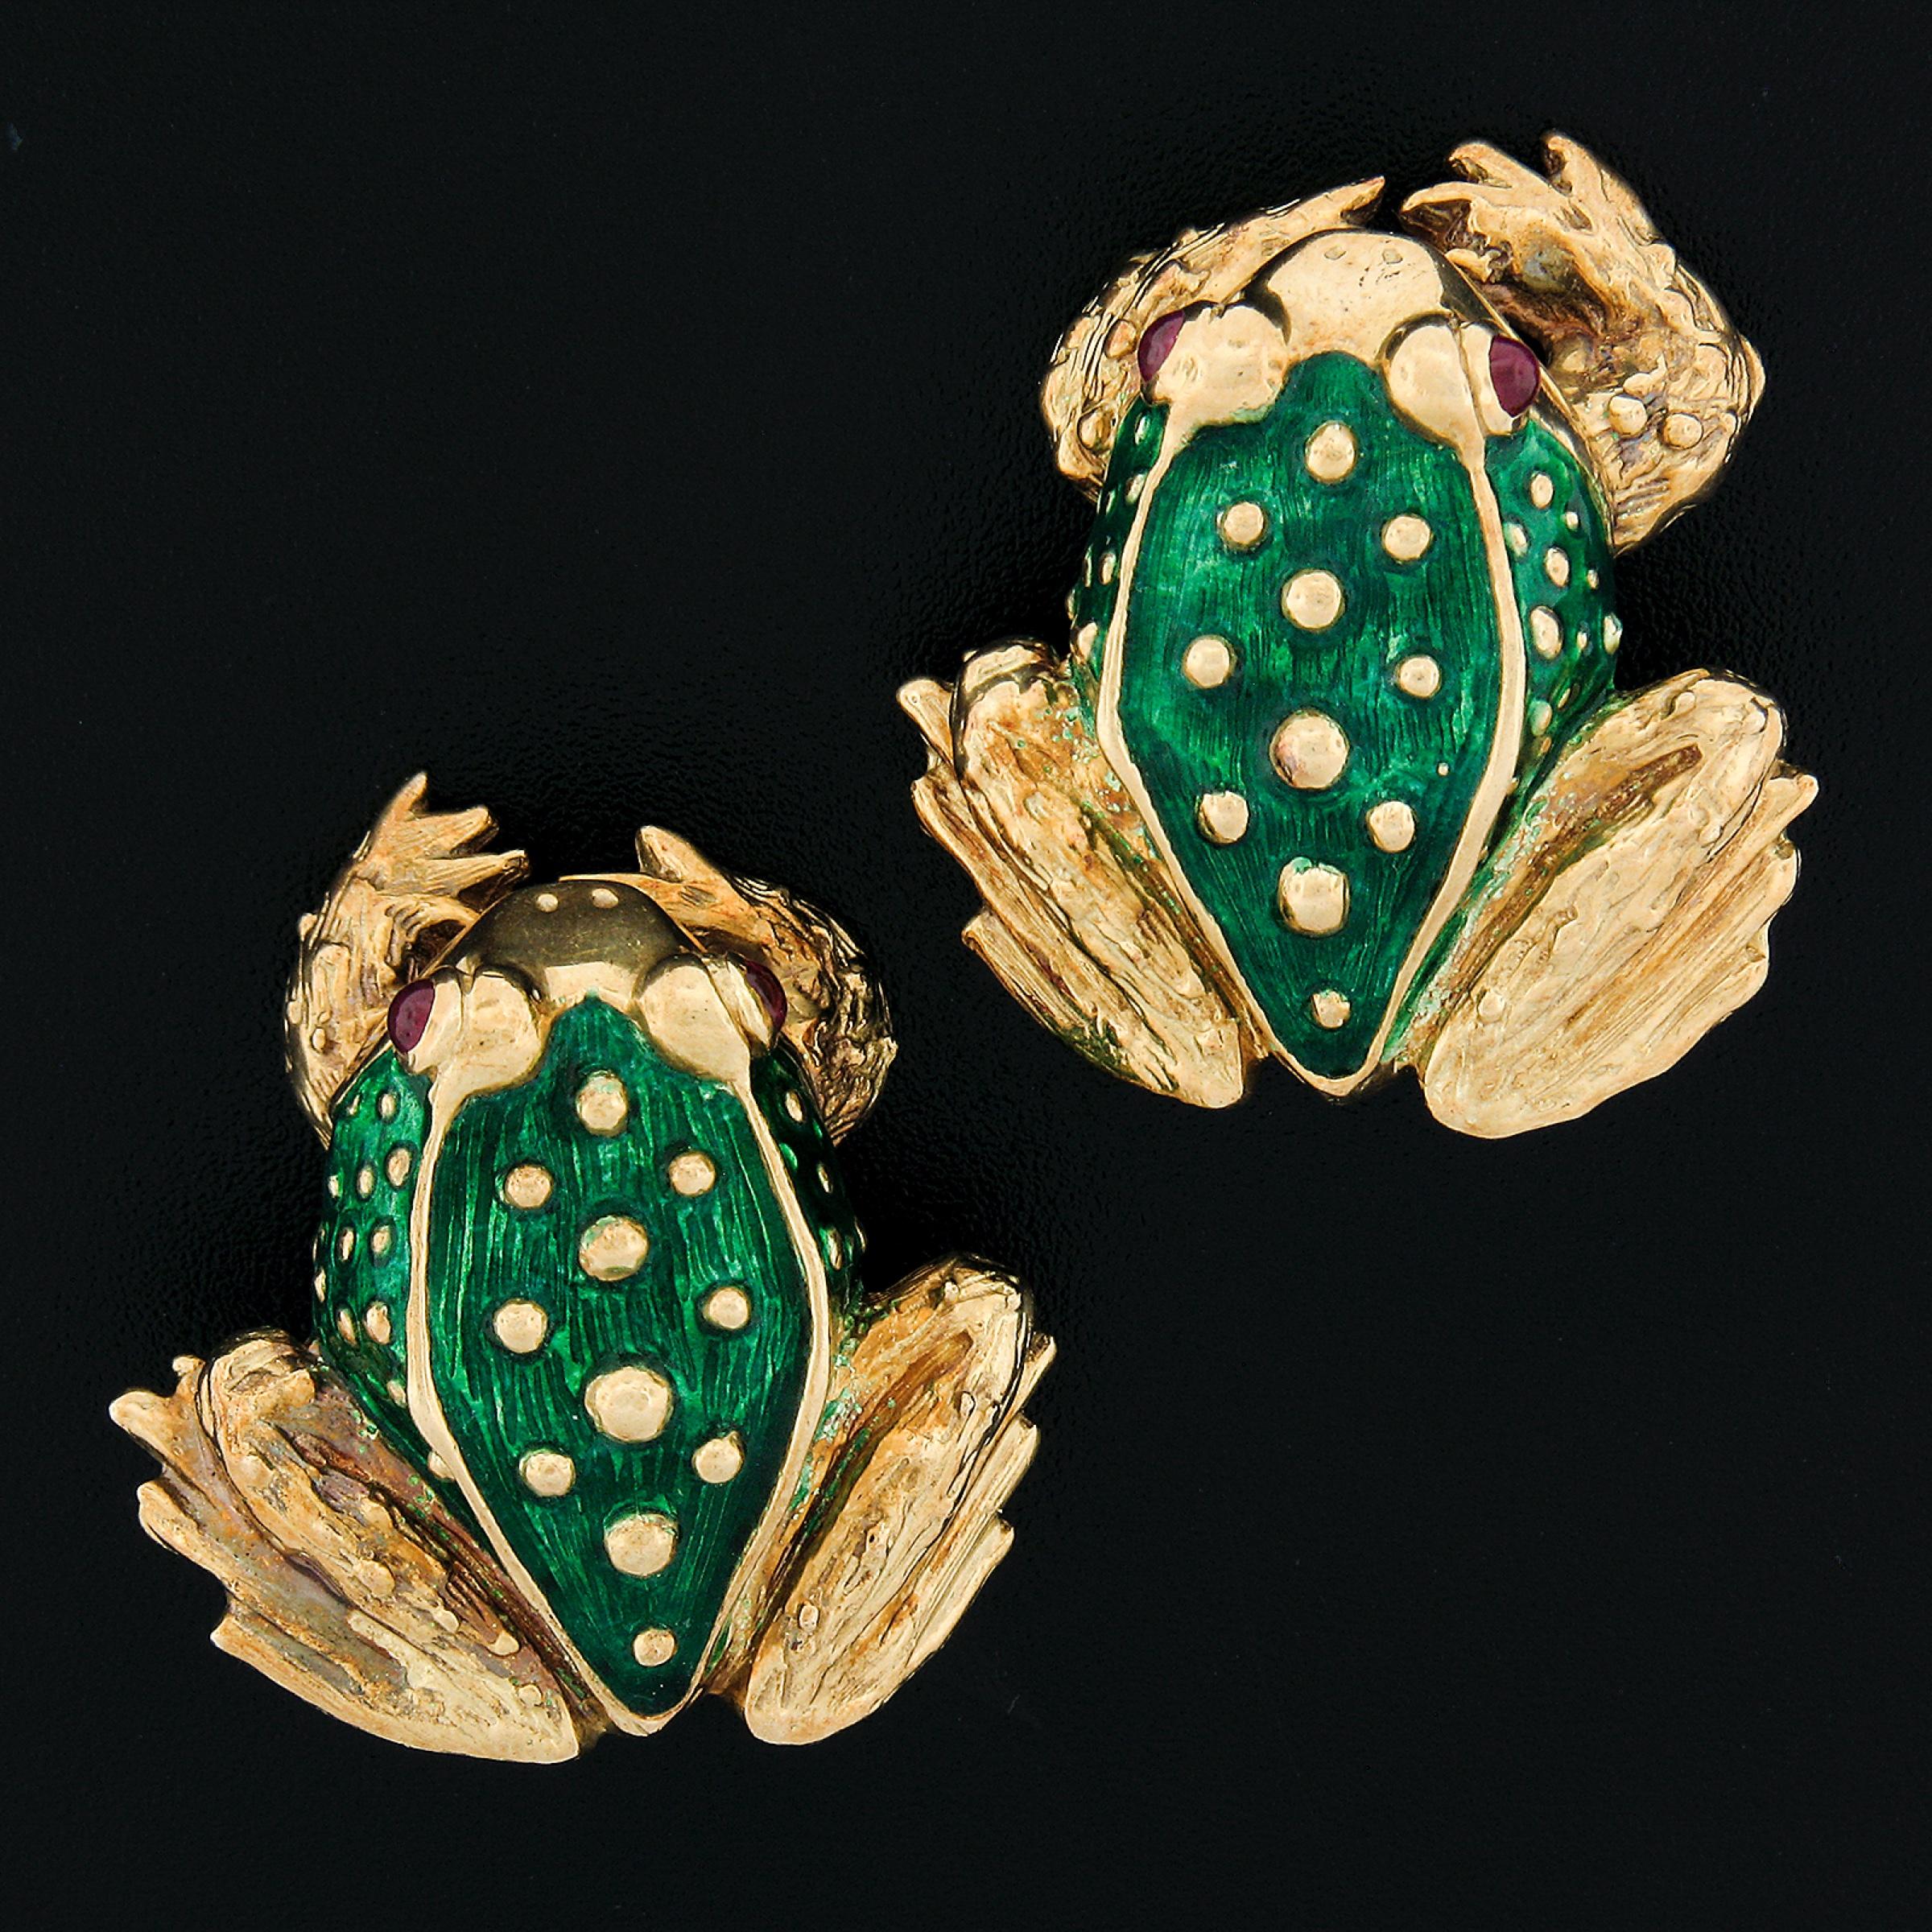 Here we have a pair of substantial and well detailed frog earrings designed by Boris Le Beau and crafted in solid 18k yellow gold. The adorable frogs are covered in gorgeous green enamel throughout their body with visible textured gold work